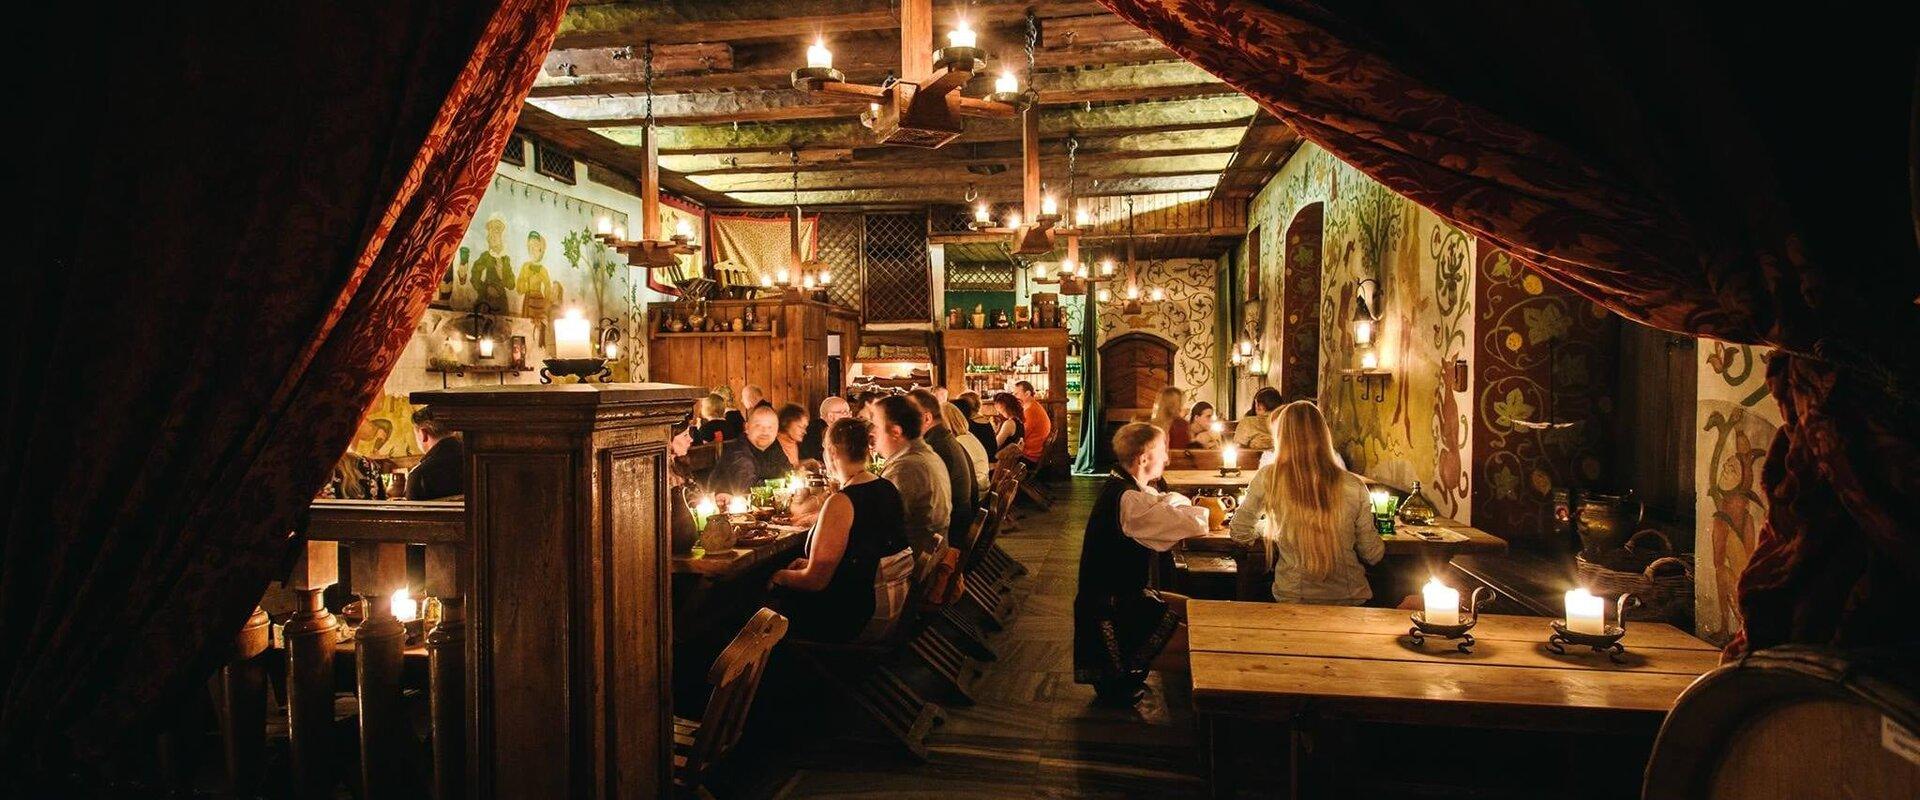 The medieval restaurant Olde Hansa is the home of a rich merchant, whose guests enjoy delicious, authentic Hansa-era meals and drinks, authentic perio